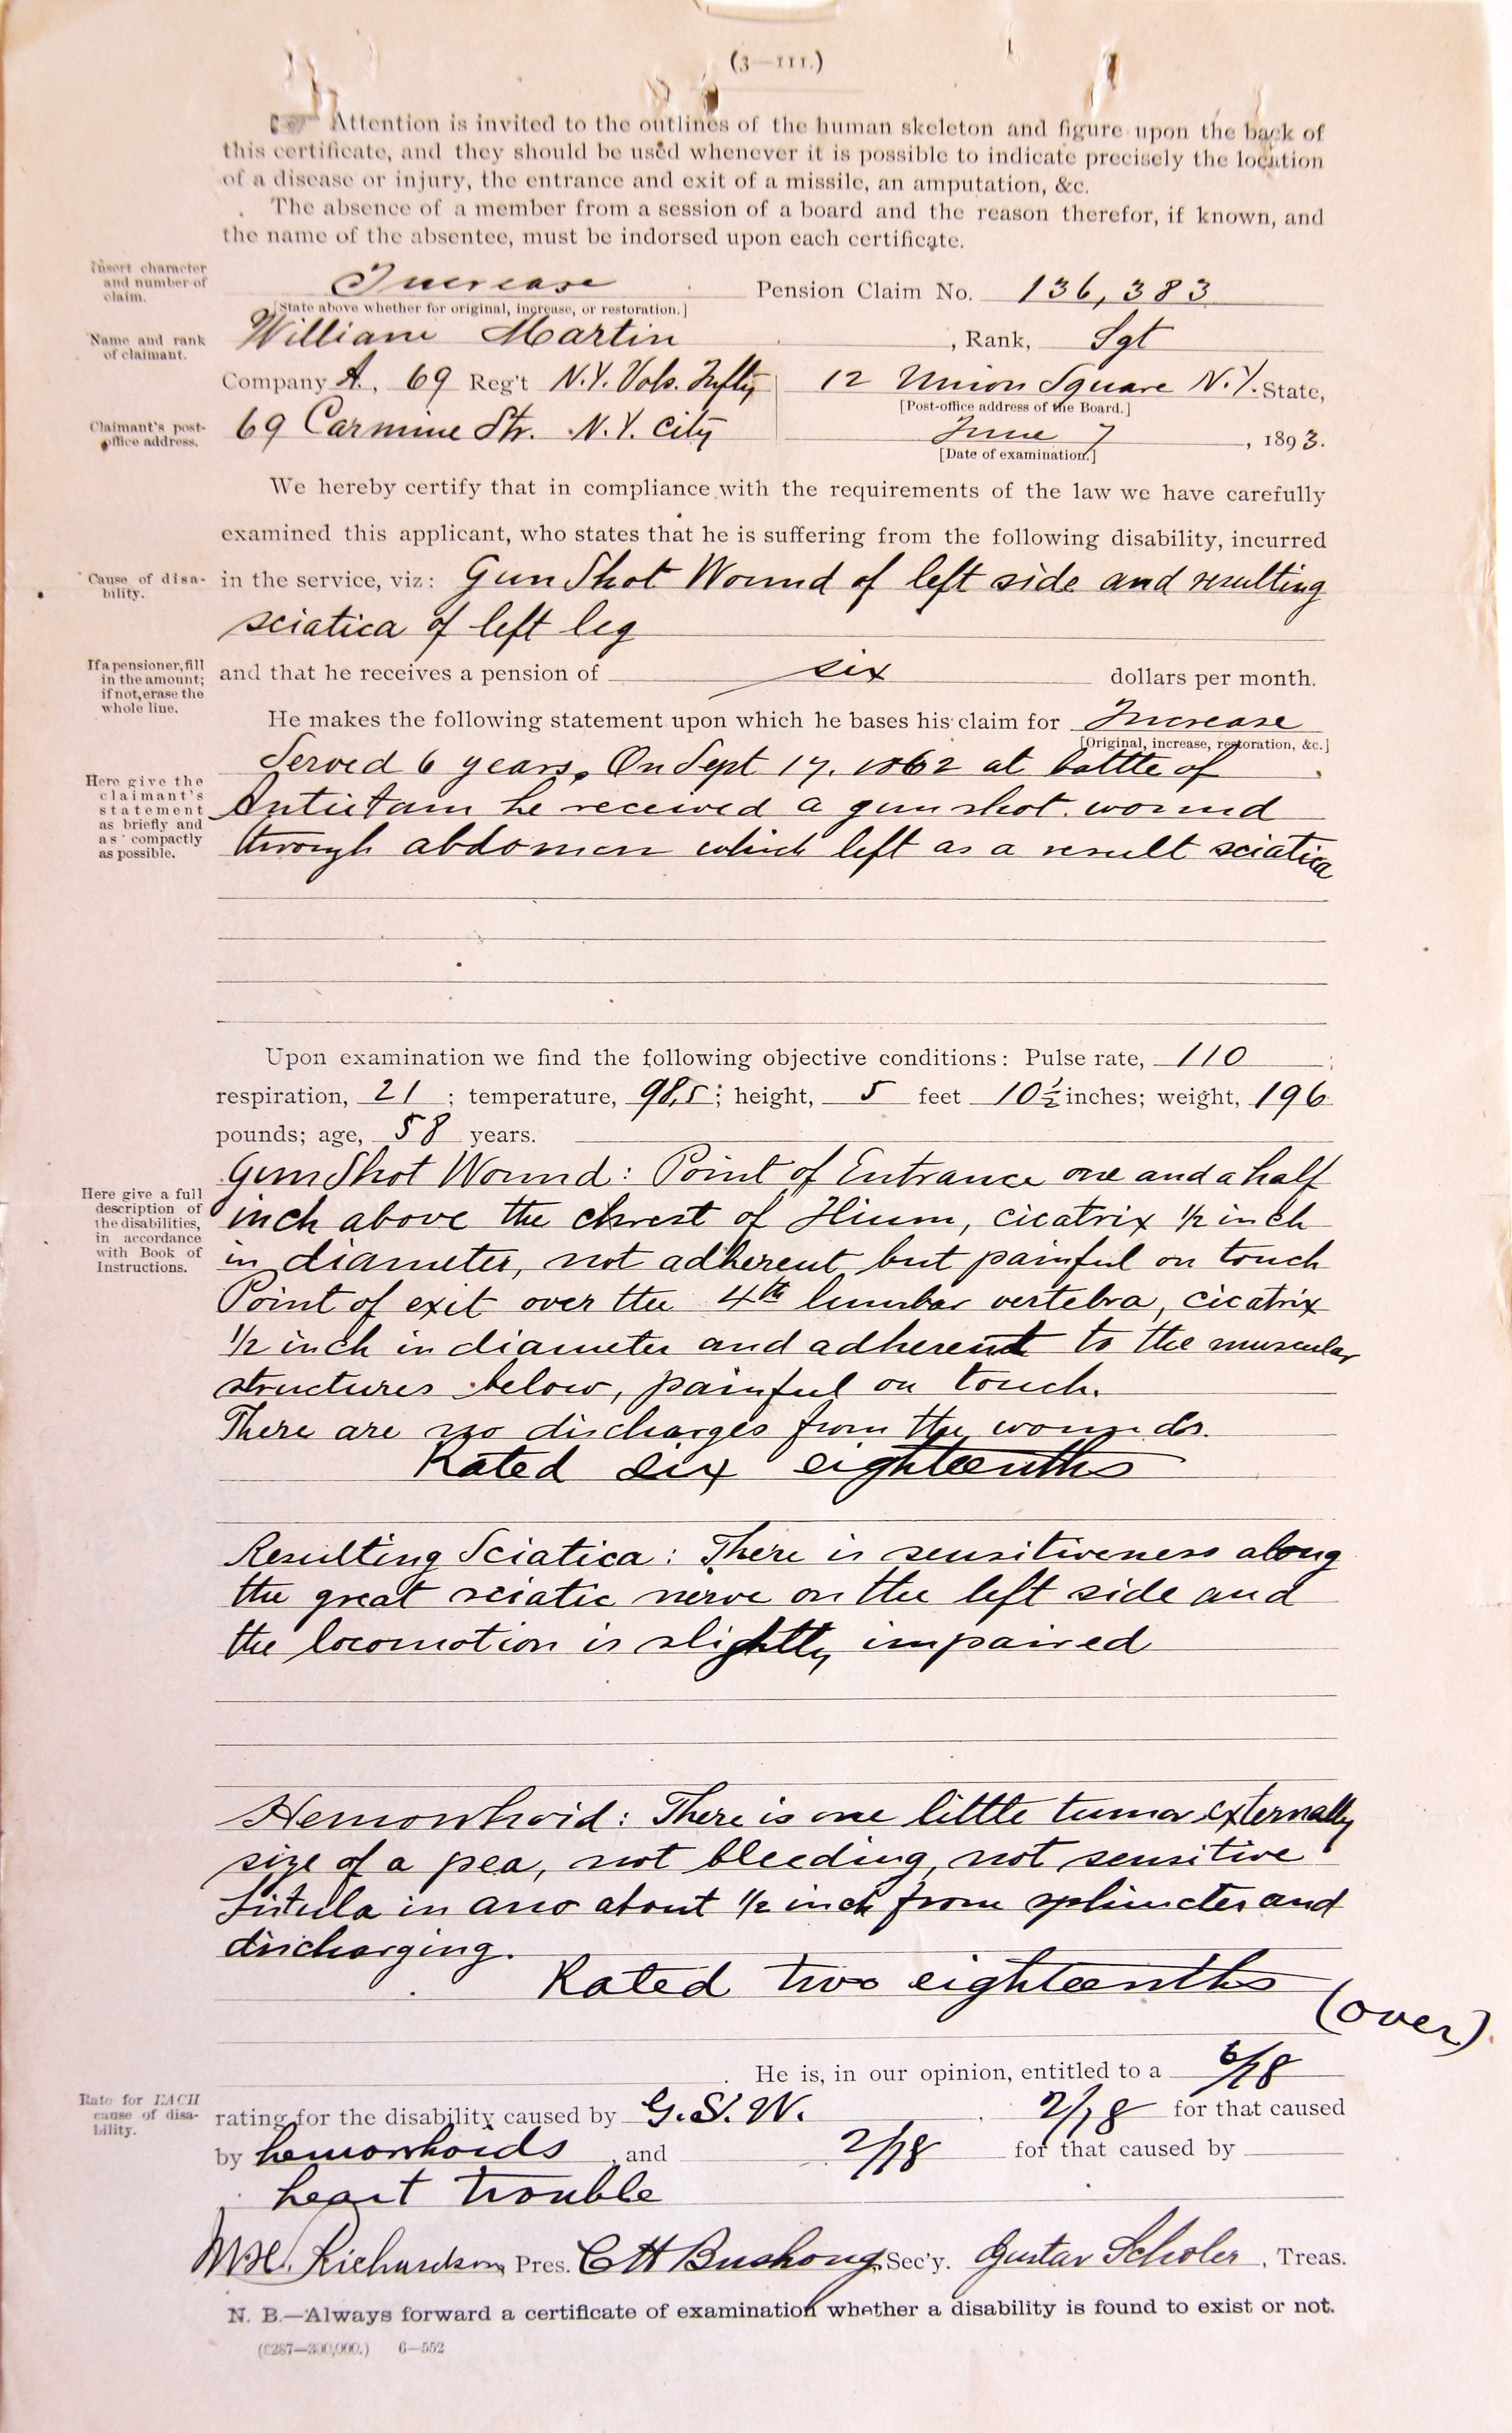 Image of a surgeon's certificate for William Martin's 1893 pension application